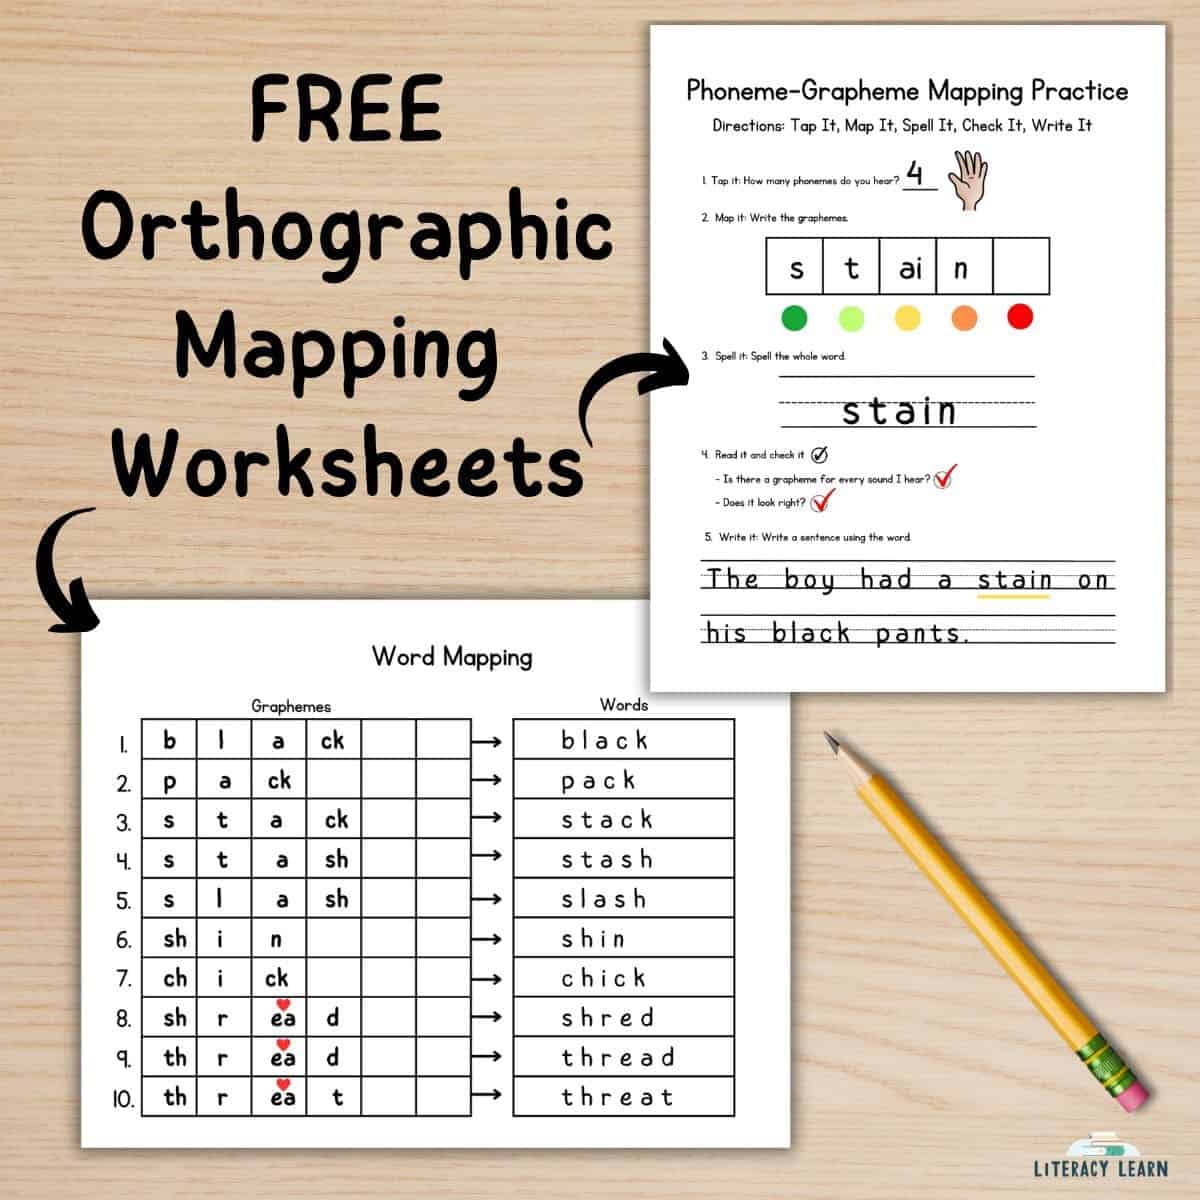 Graphic showing 2 phoneme-grapheme worksheets with title "Free orthographic mapping worksheets."